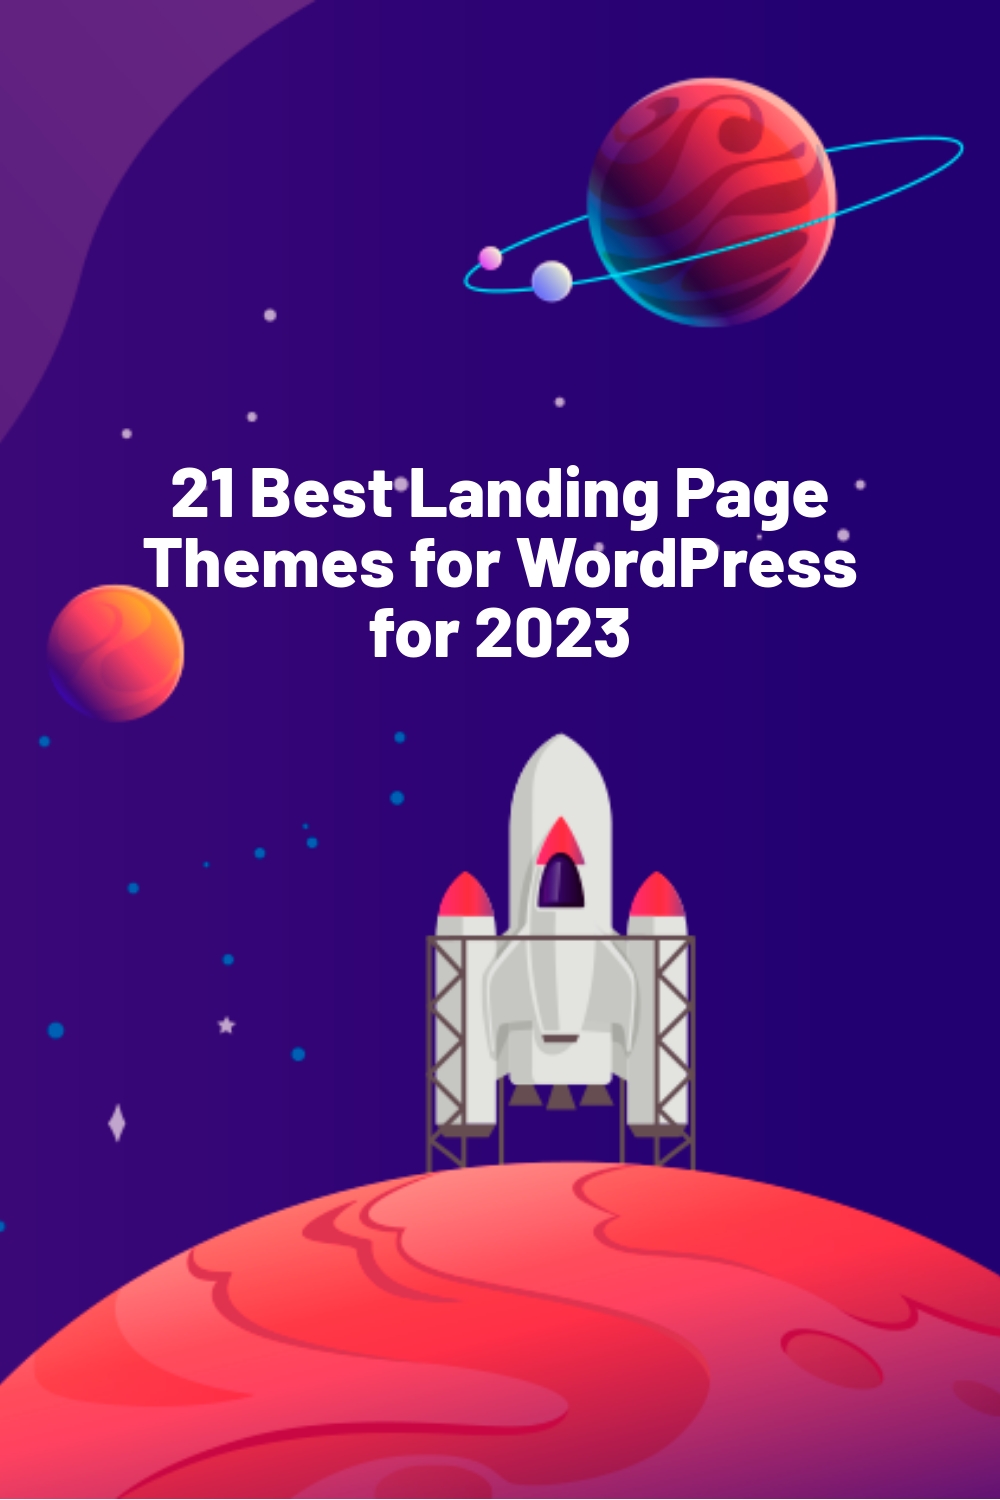 21 Best Landing Page Themes for WordPress for 2023